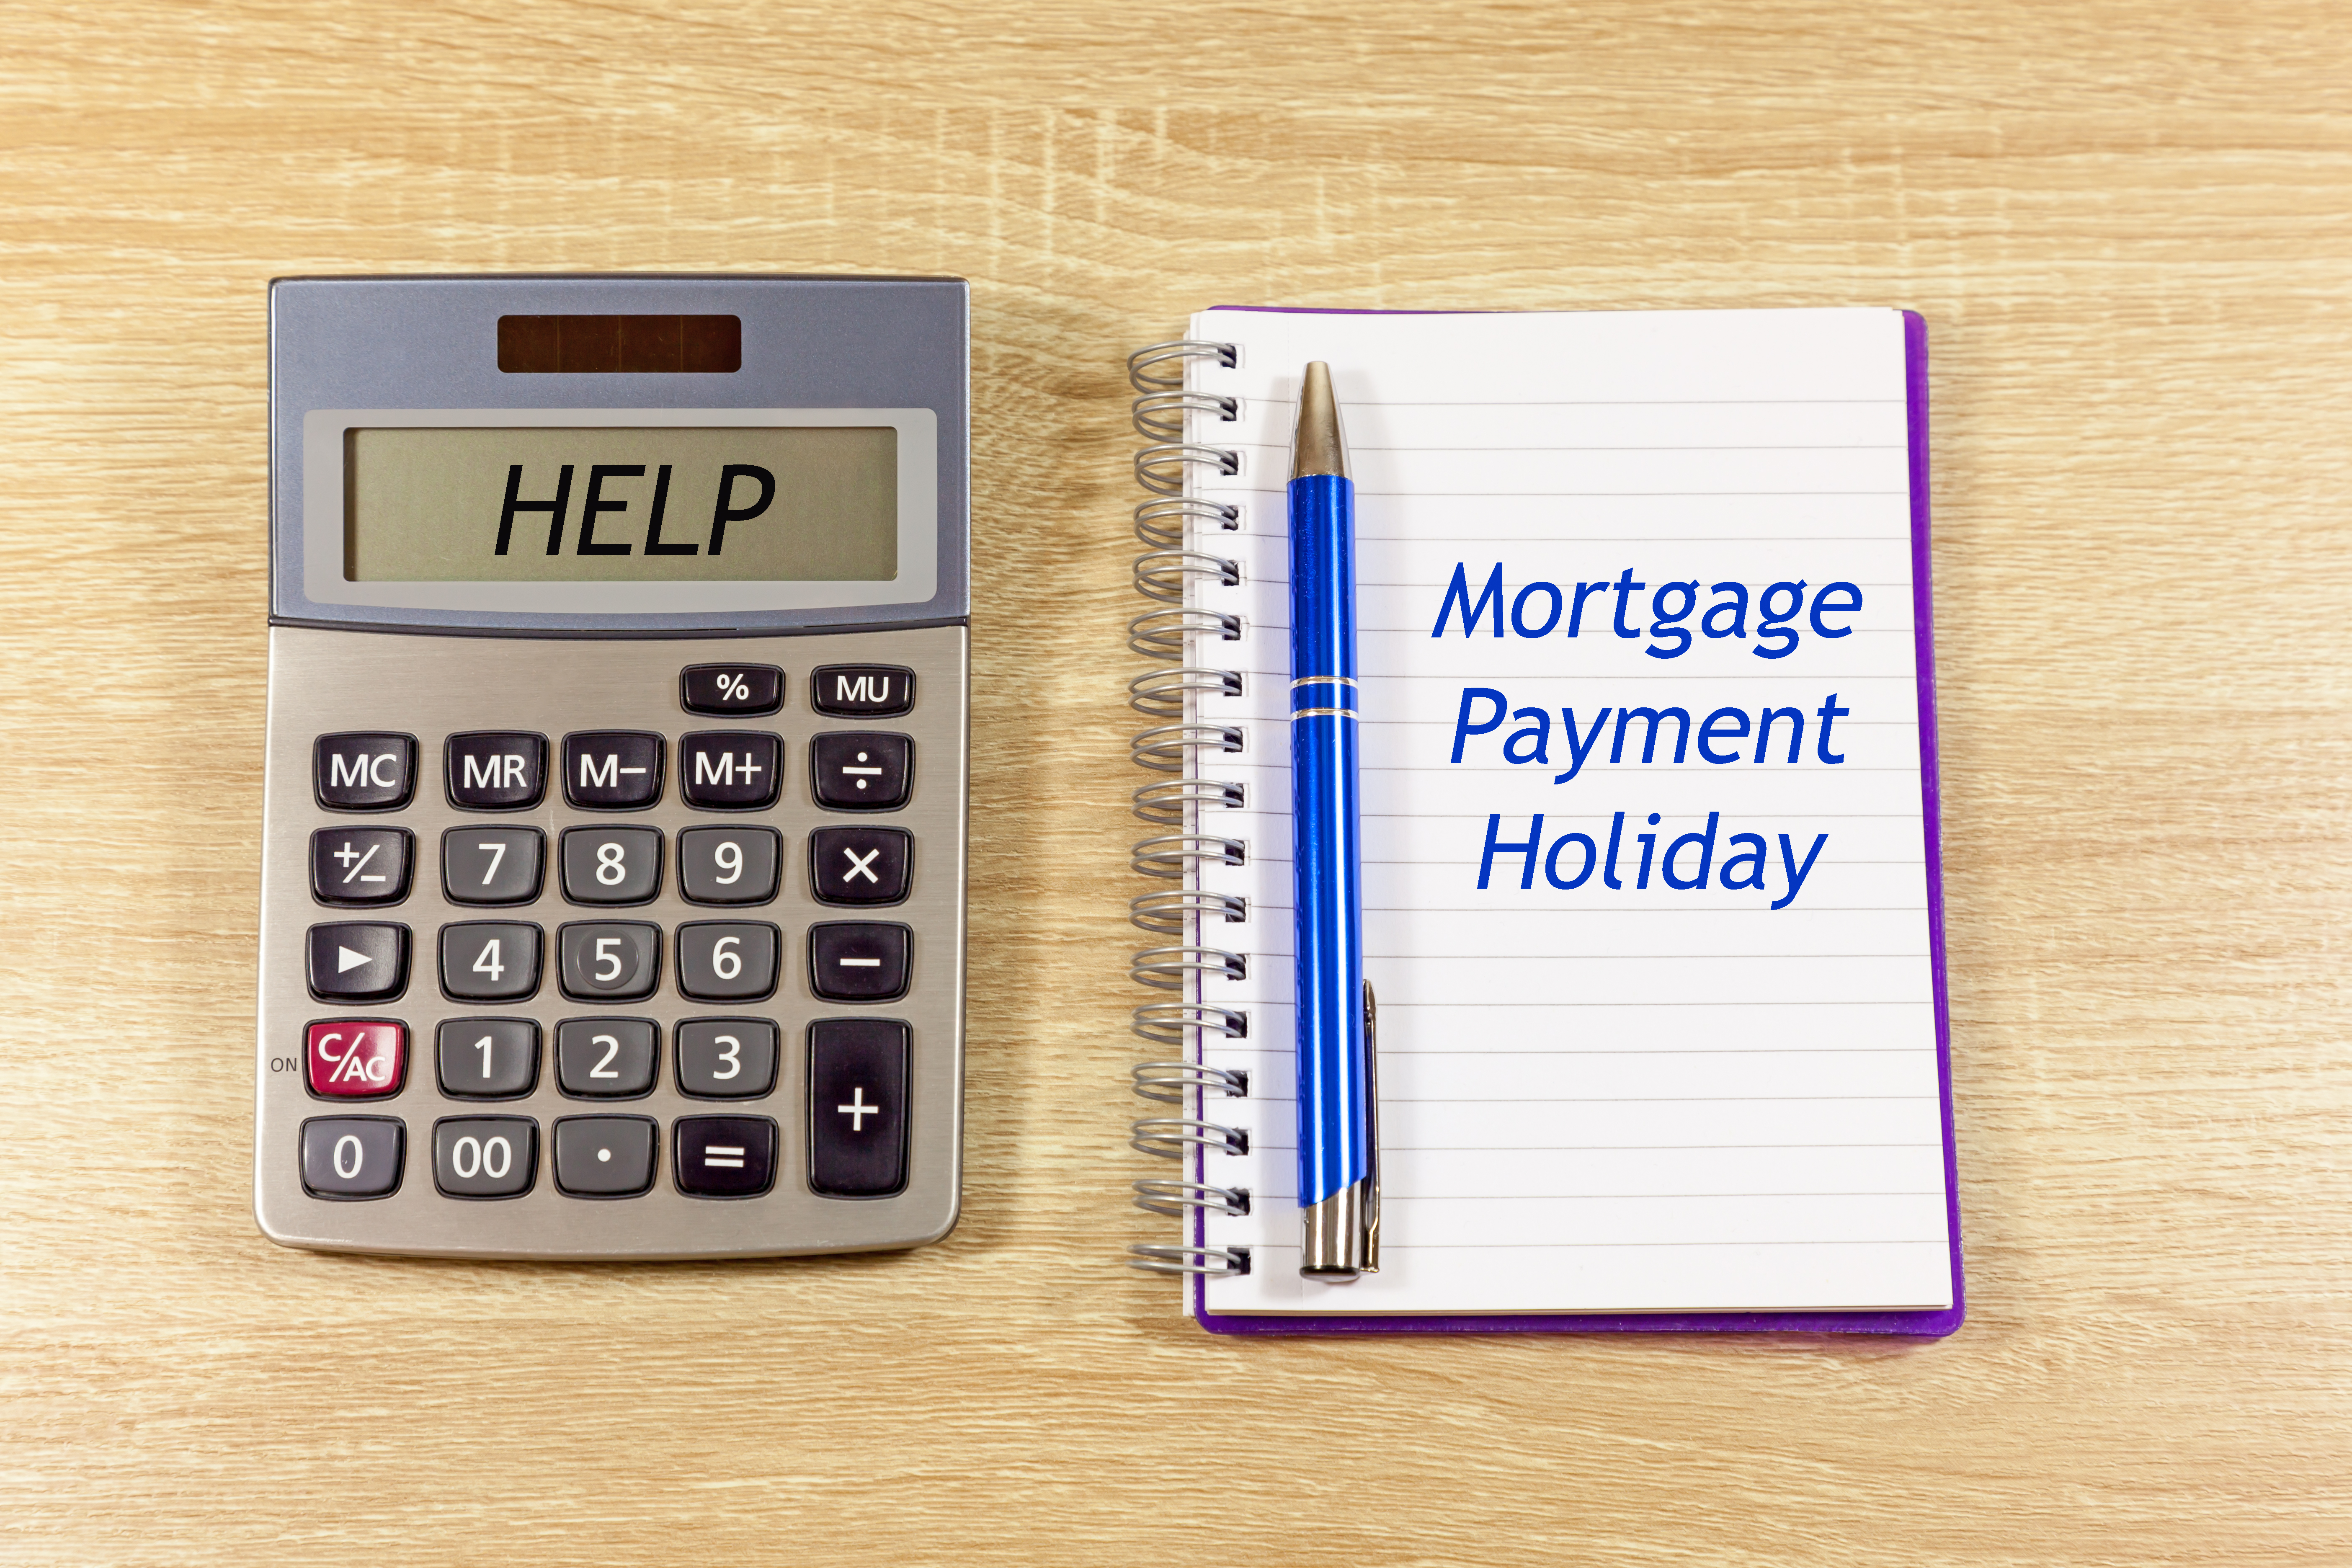 1.9 million mortgage payment deferrals offered in three months